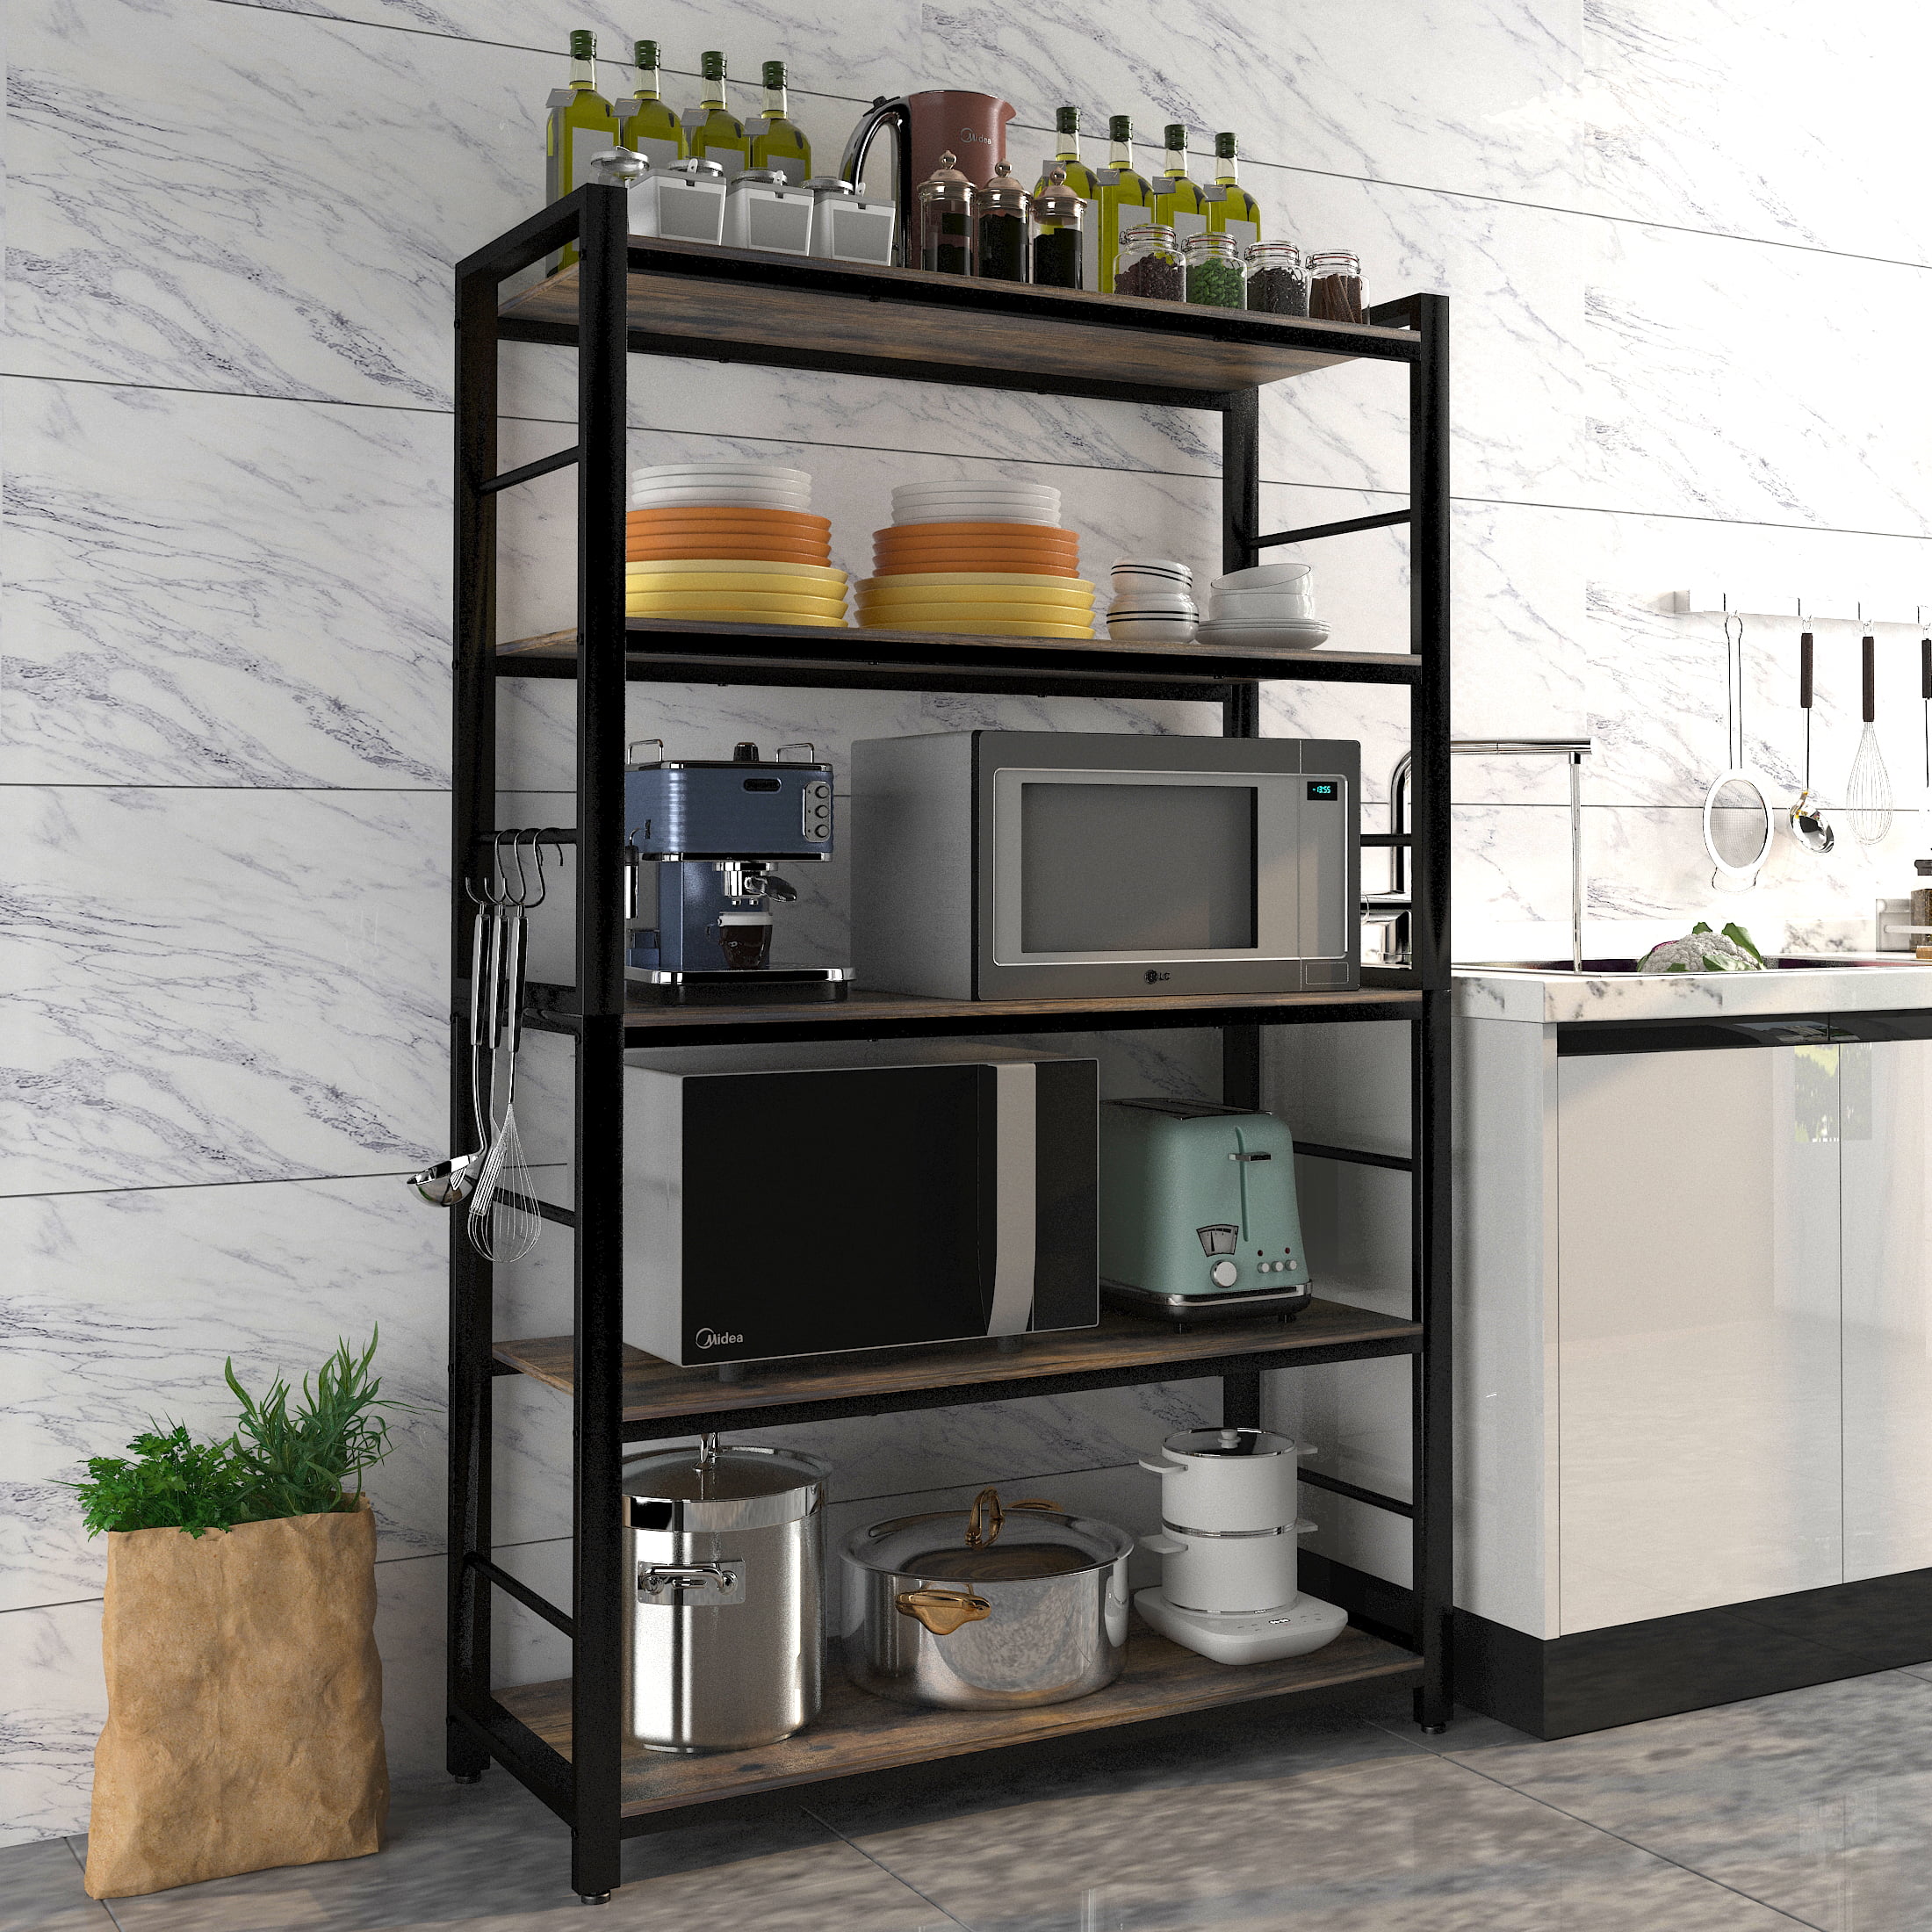 NAIYUFA 5-Tier Kitchen Baker’s Rack with Storage,Large Bakers Rack with  Cabinet, Heavy Duty Oven Stand Microwave Rack,Free Standing Kitchen Utility